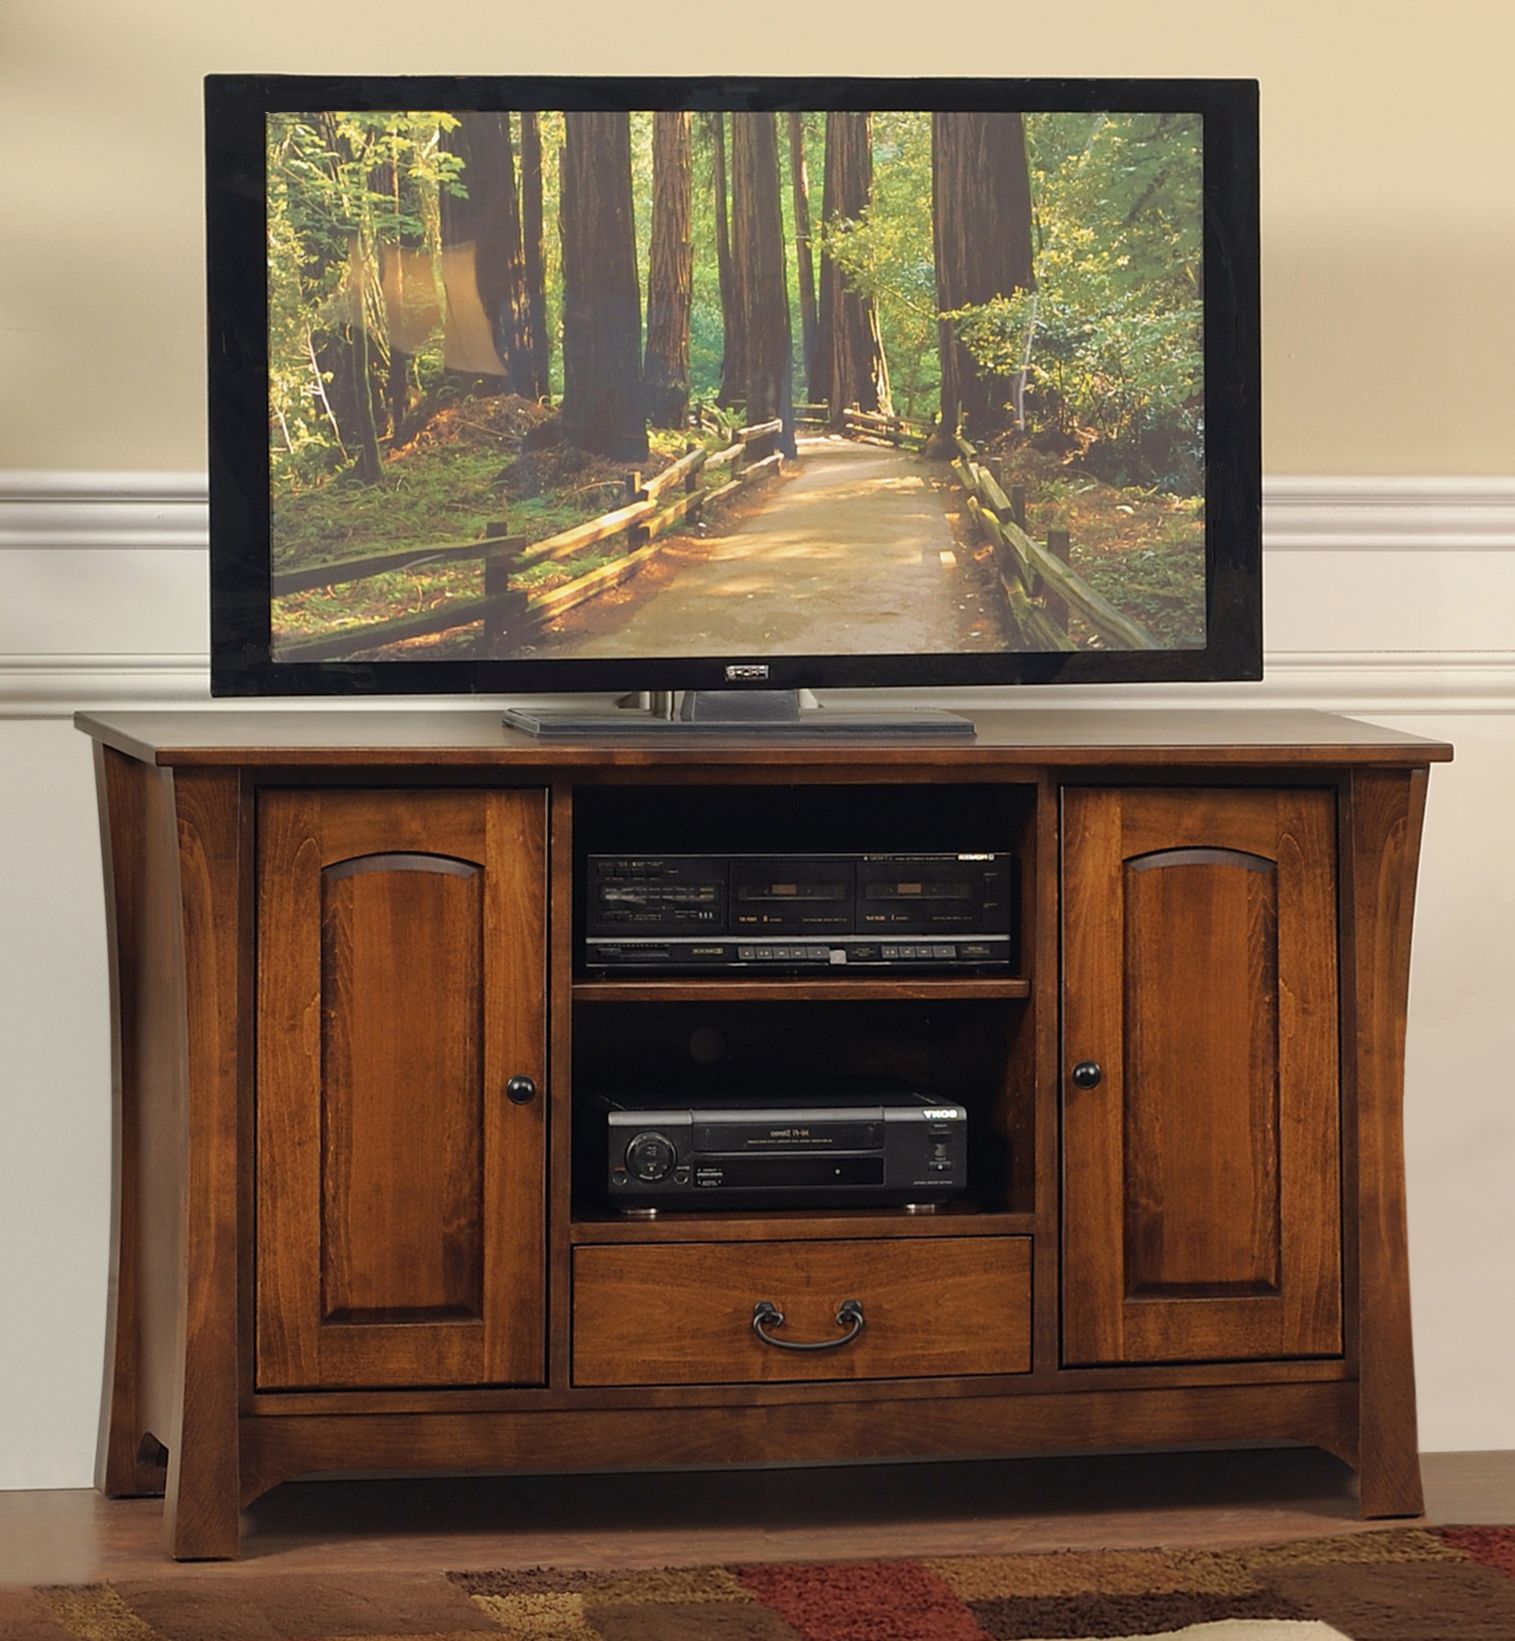 Woodbury Tv Stand – Amish Oak Warehouse Throughout Astoria Oak Tv Stands (View 3 of 20)